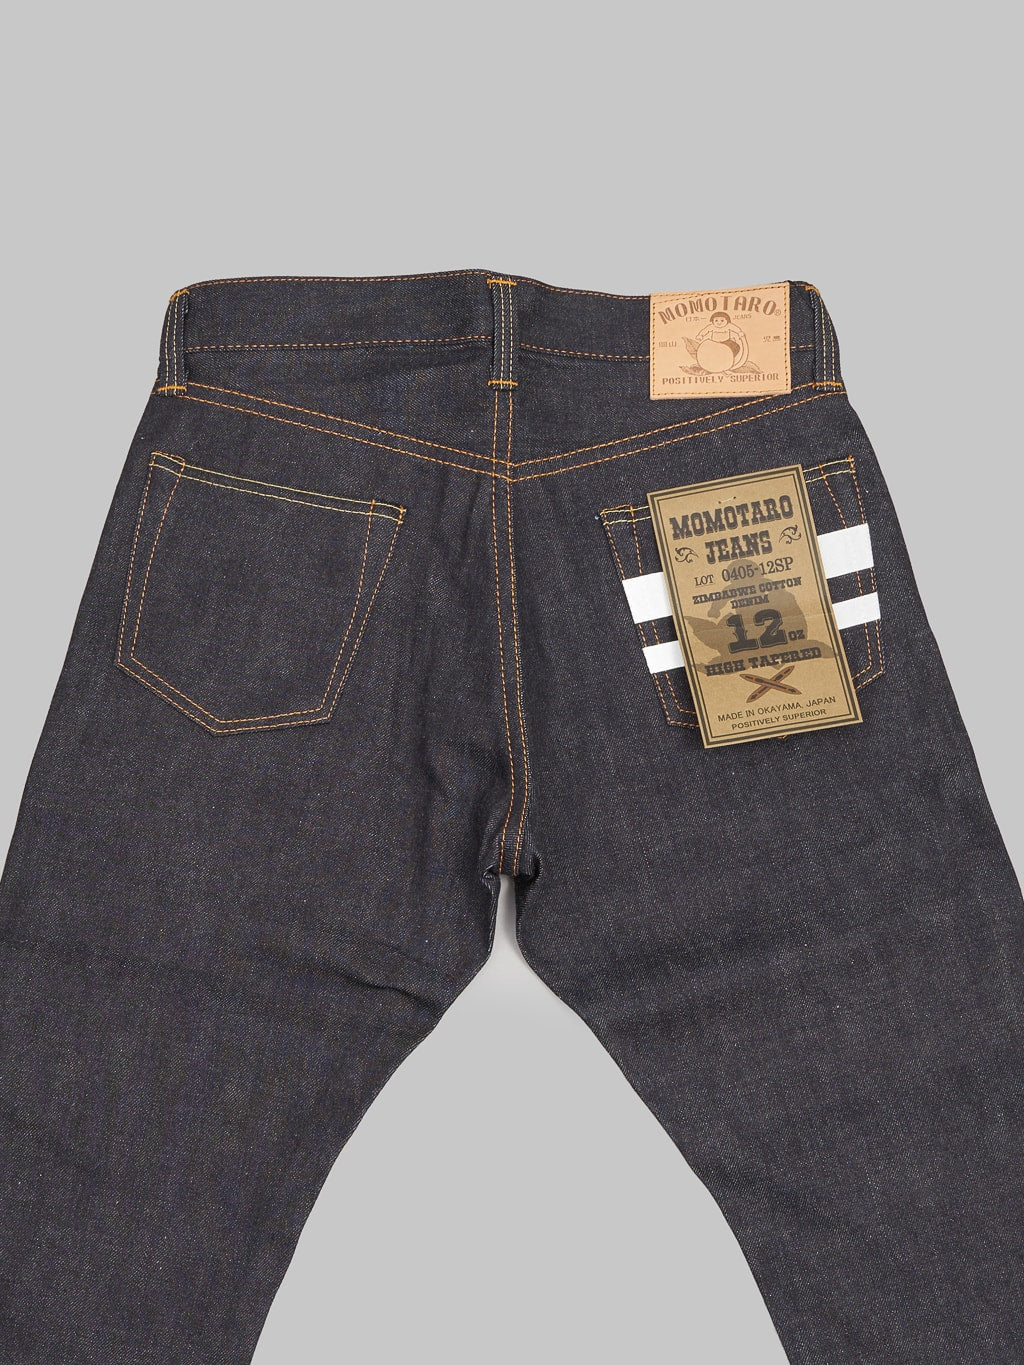 Momotaro 0405 12 going to batle 12oz high Tapered Jeans back pockets